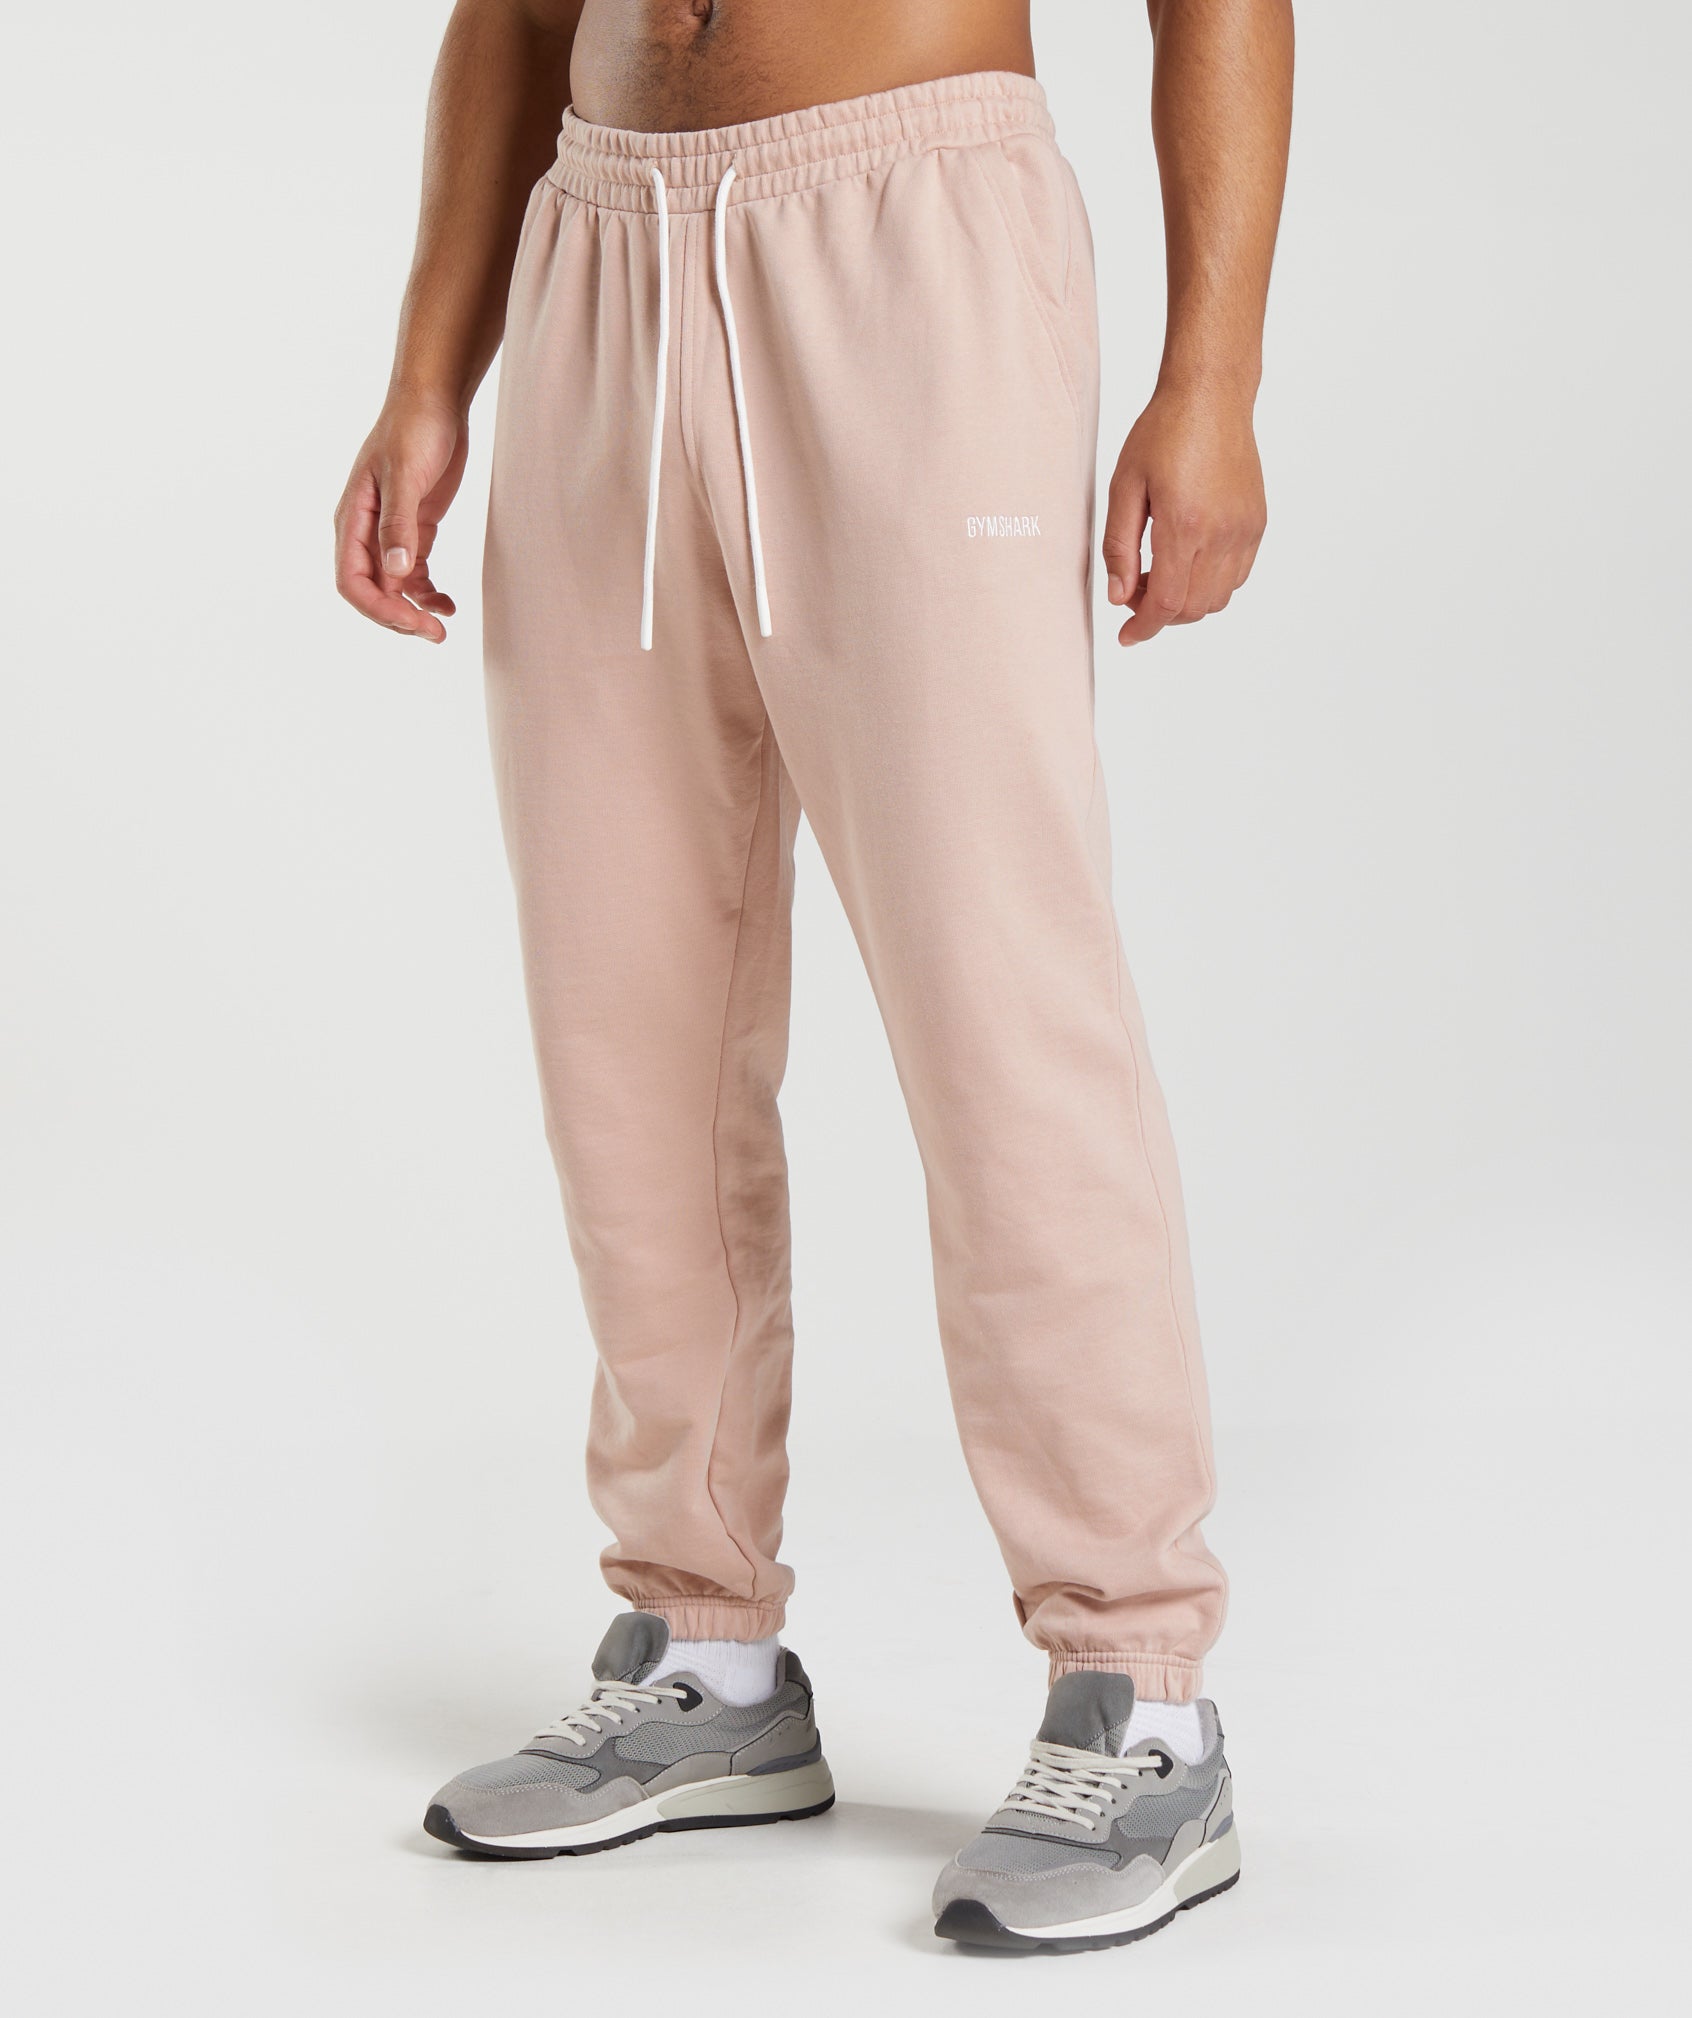 Rest Day Sweats Joggers in Dusty Taupe